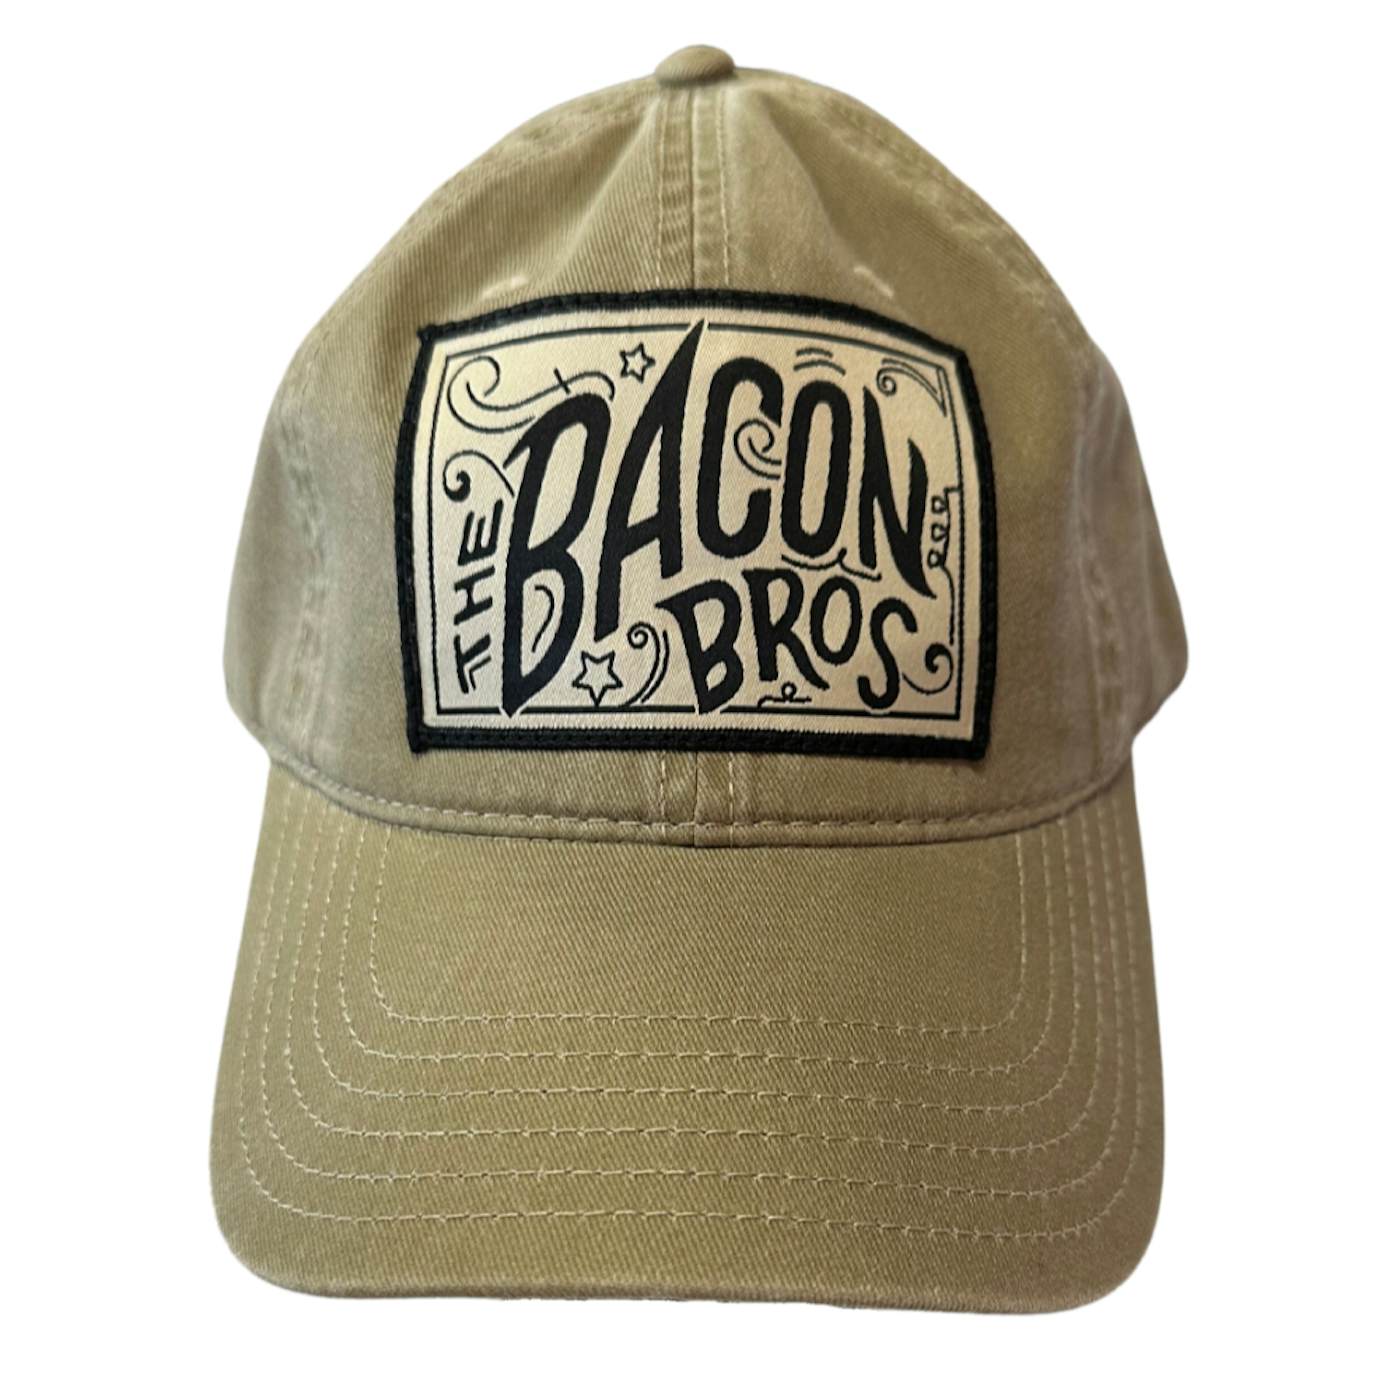 The Bacon Brothers Logo Hat